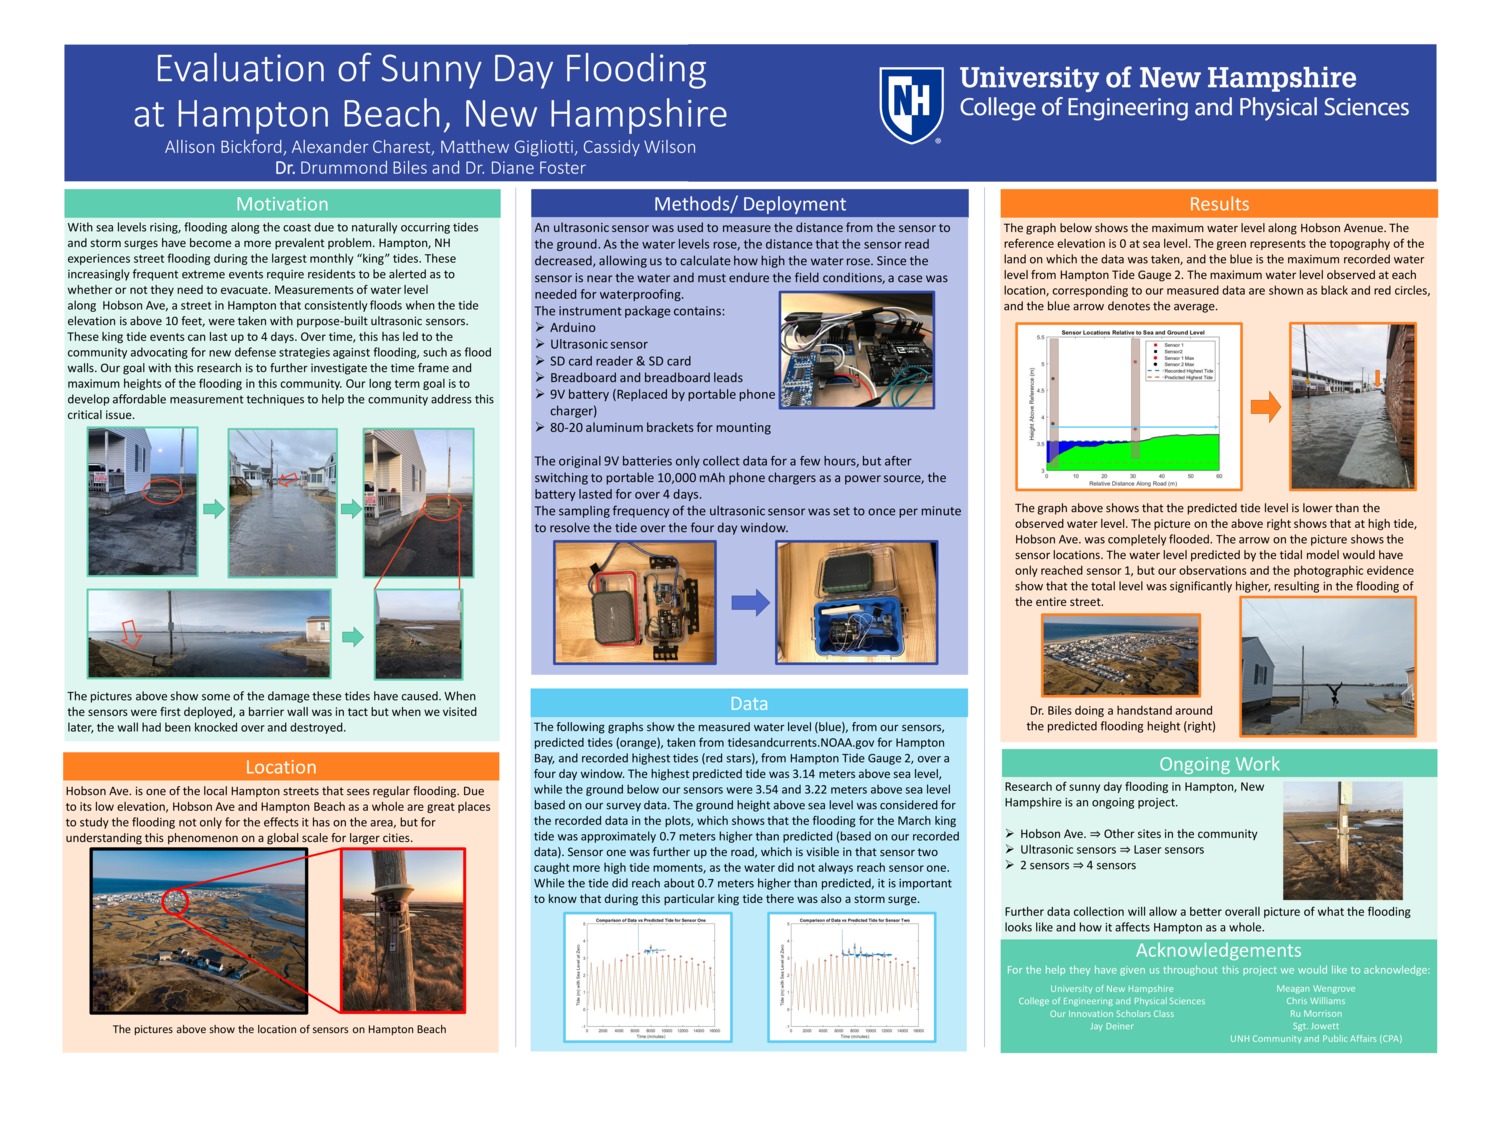 Evaluation Of Sunny Day Flooding At Hampton Beach by arc1086